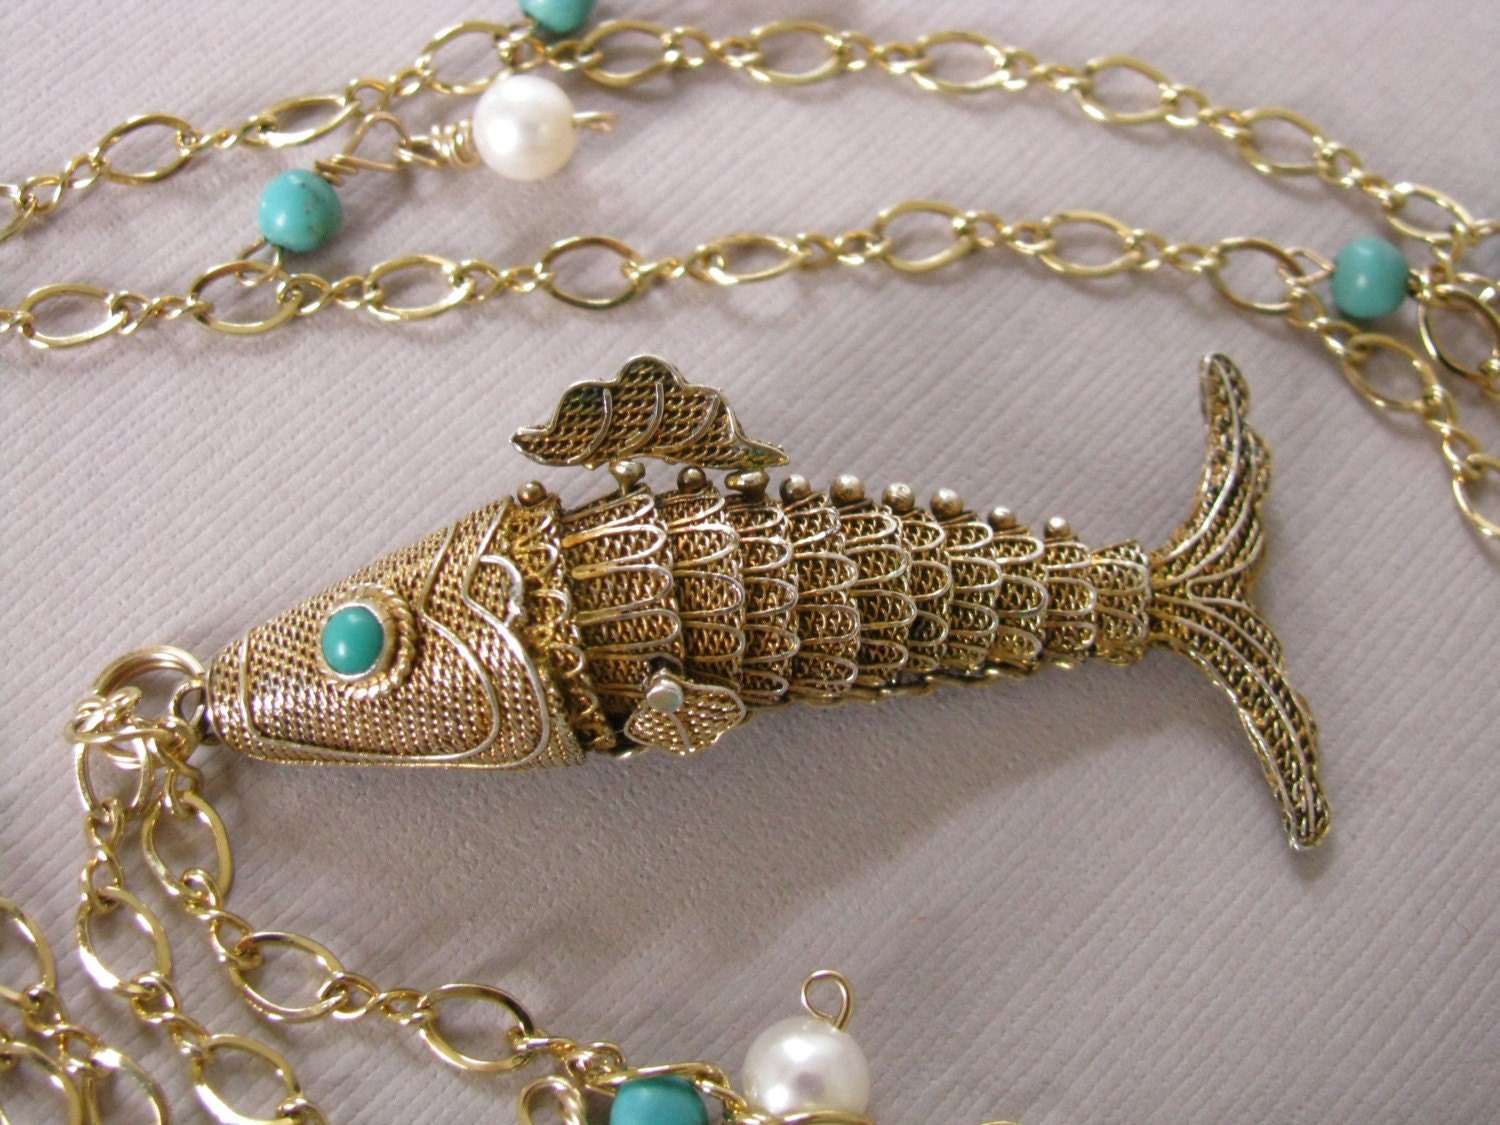 Vintage Fish Koi Necklace with turquoise and pearls